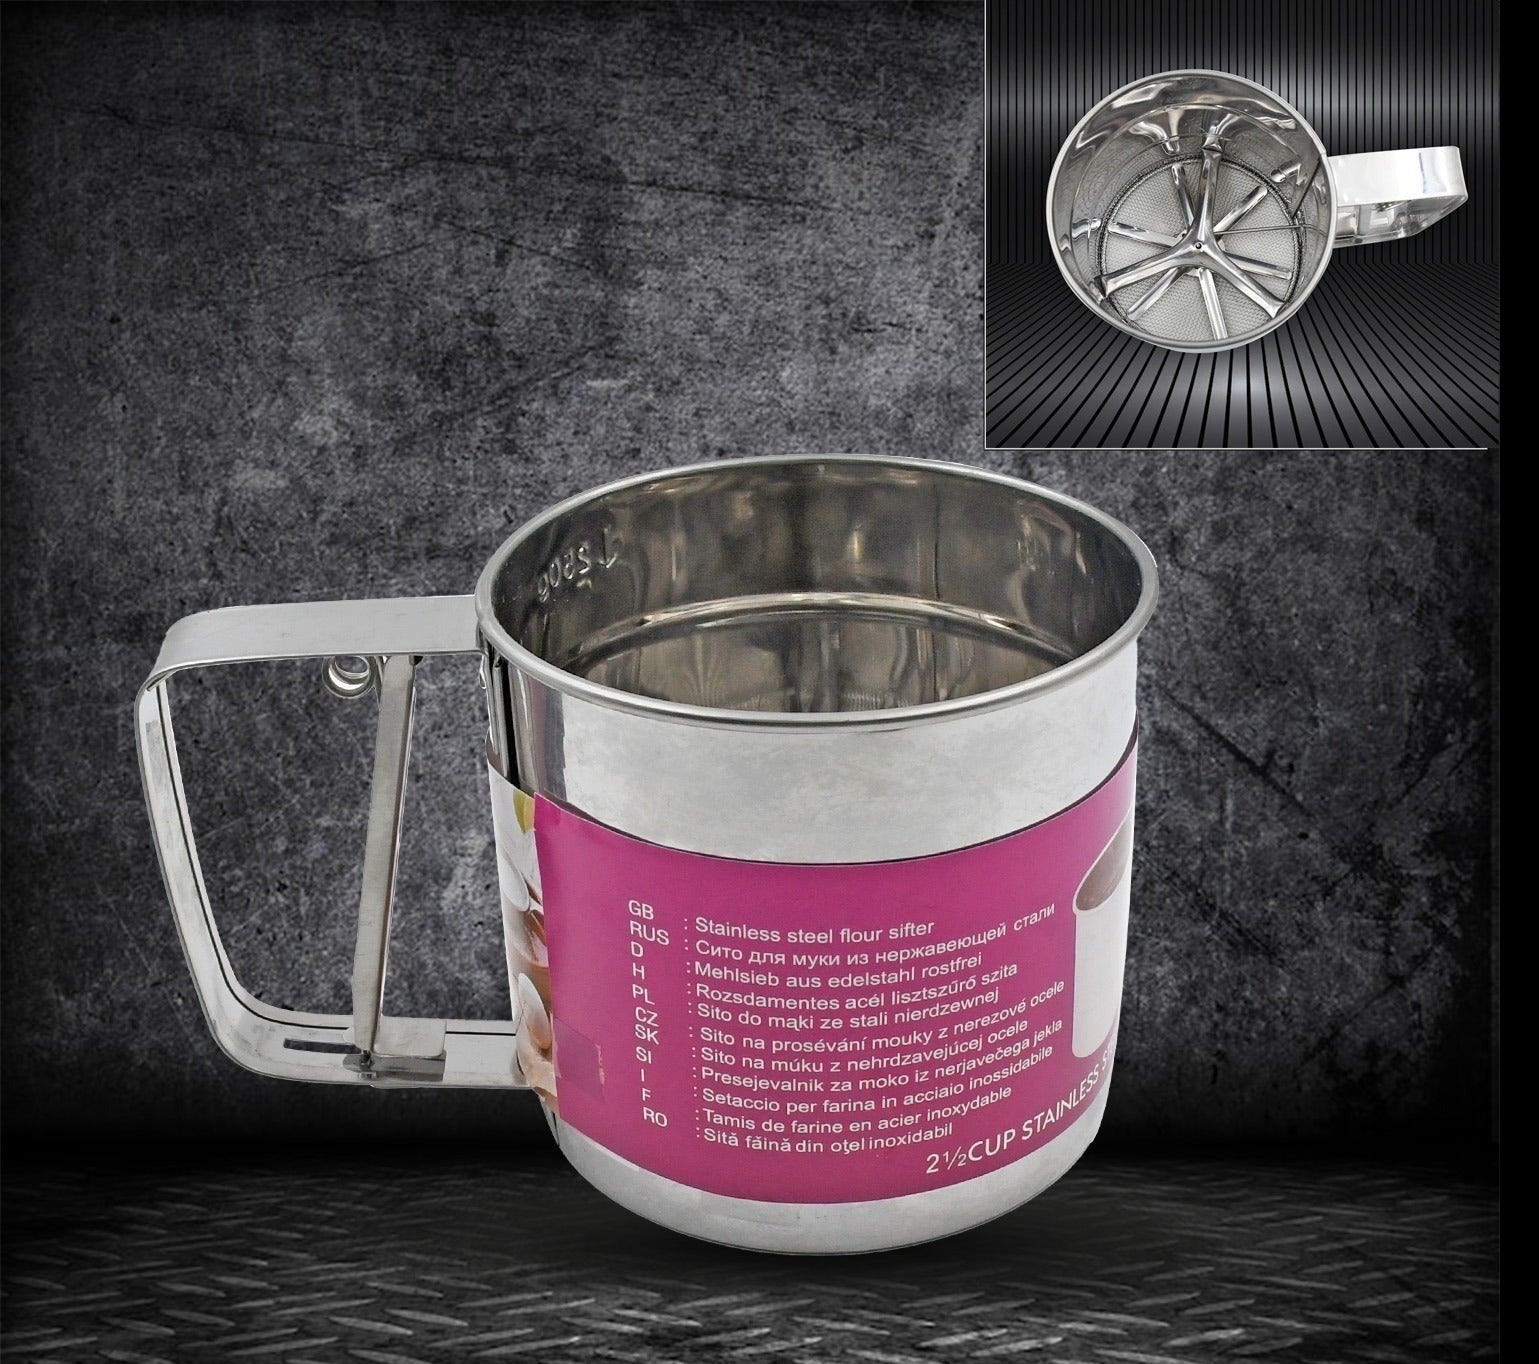 Stainless Steel Flour Sifter with Measuring Scale - Multipurpose Kitchen Tool